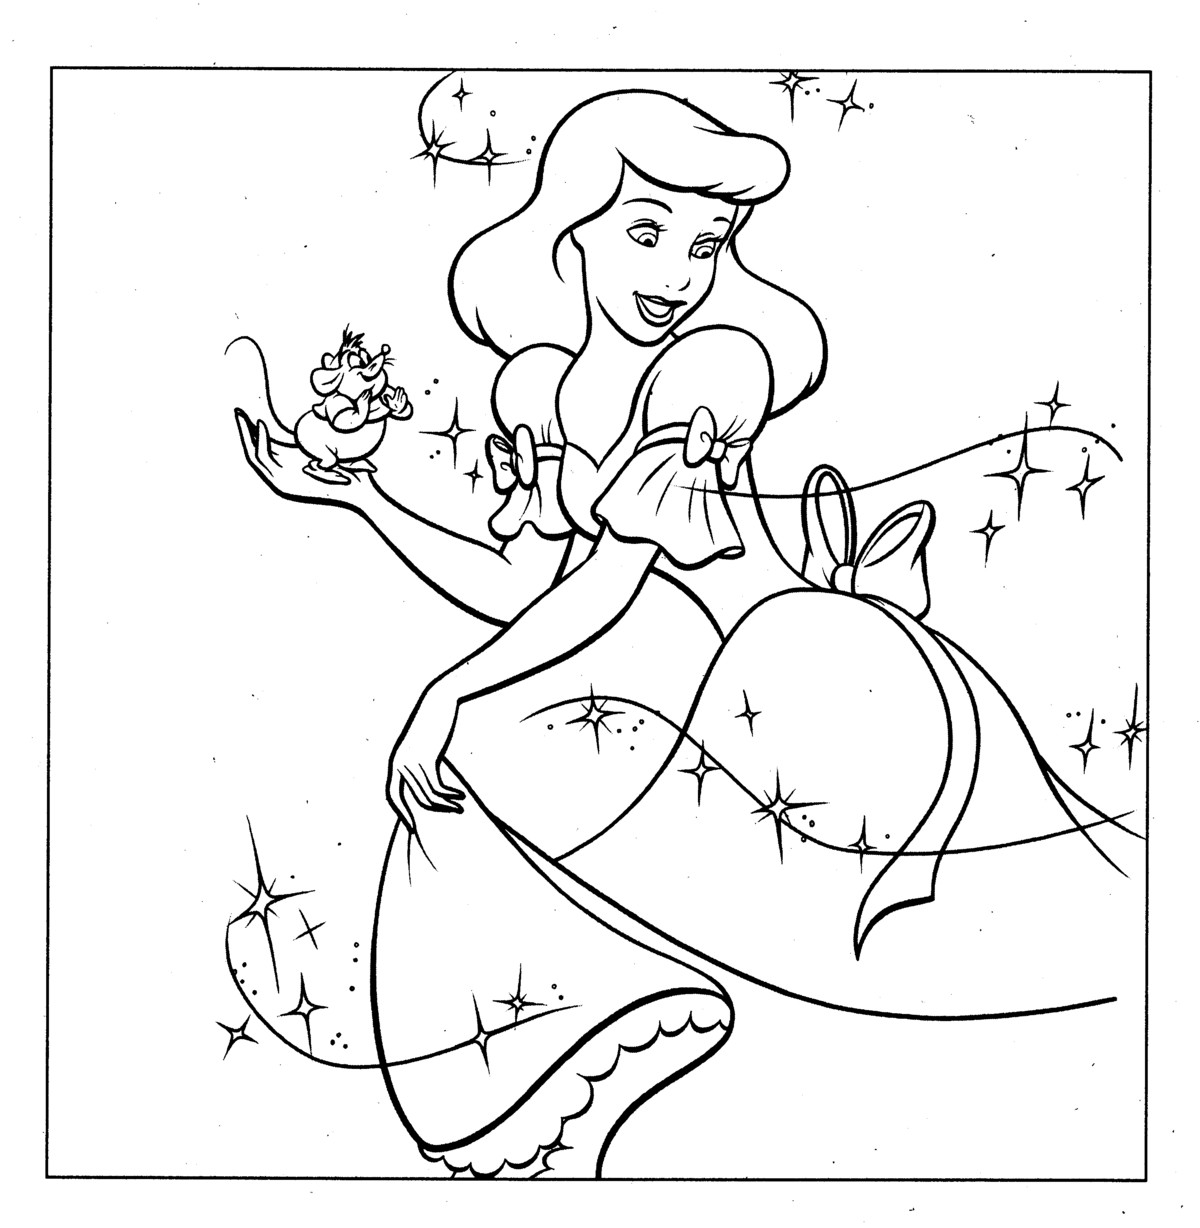 cinderella coloring page | Minister Coloring